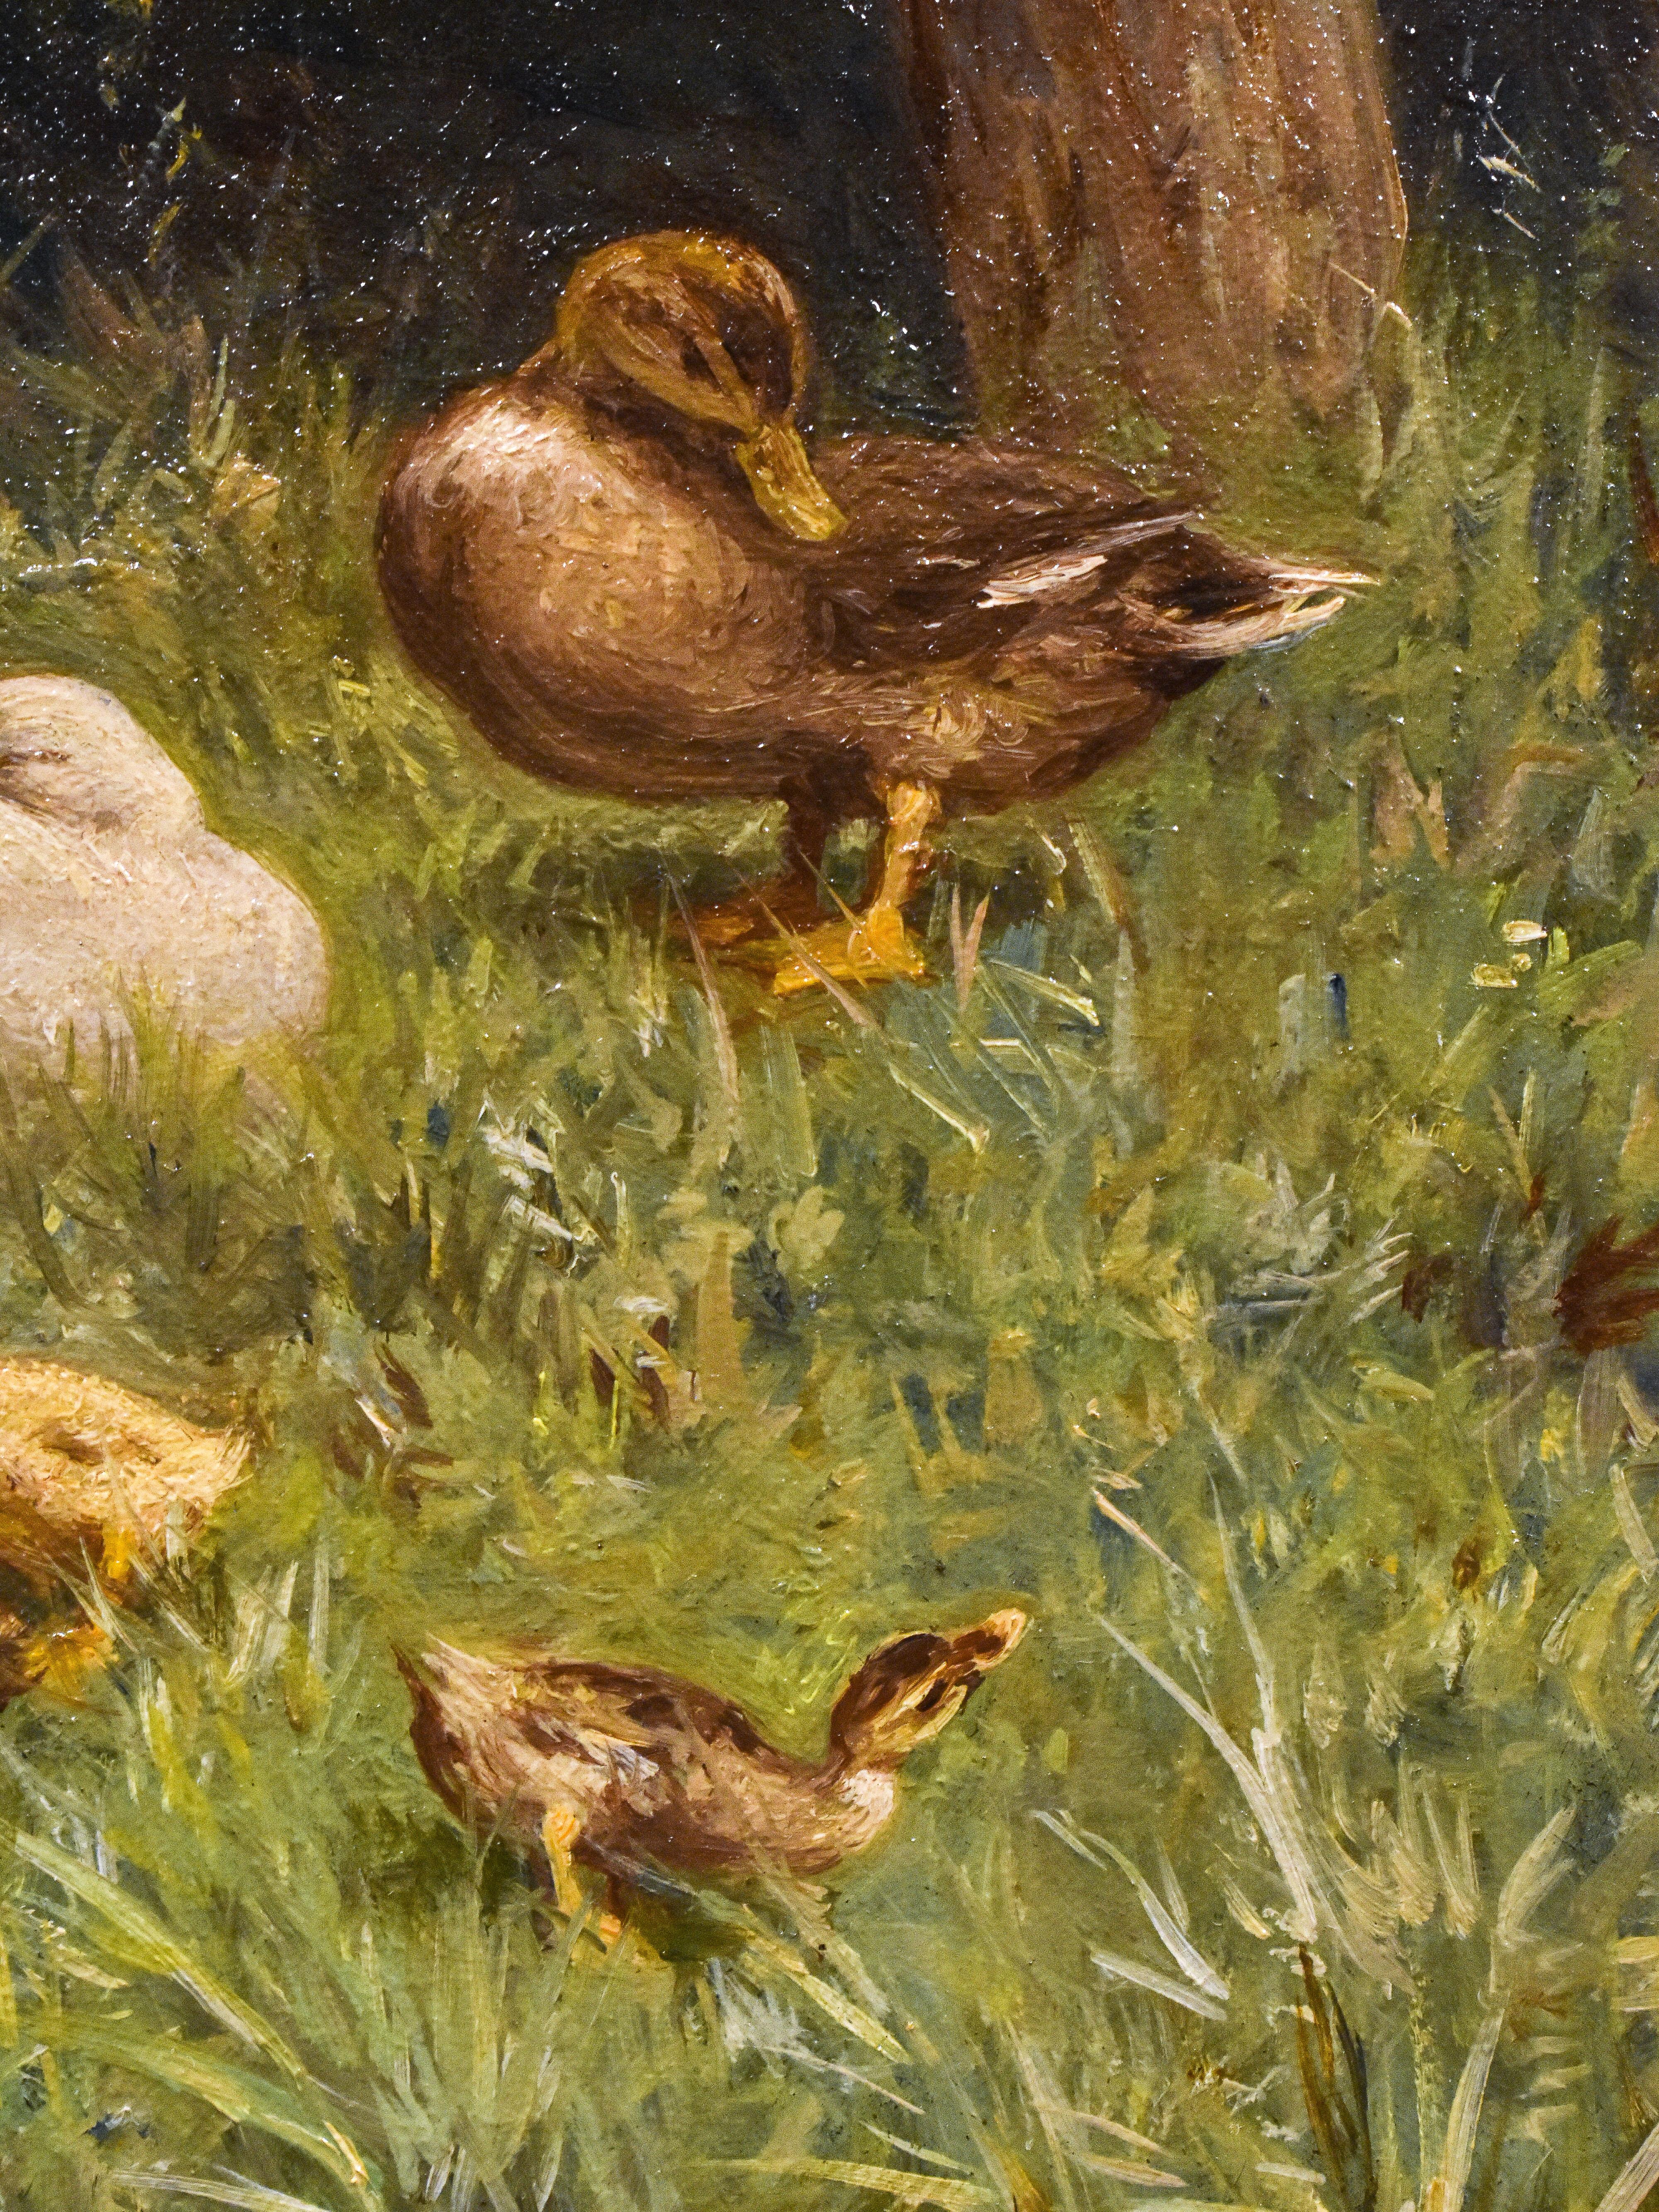 Ducks at the waterfront - Constant Artz - Around 1930 - Brown Animal Painting by Artz, David Adolph Constant